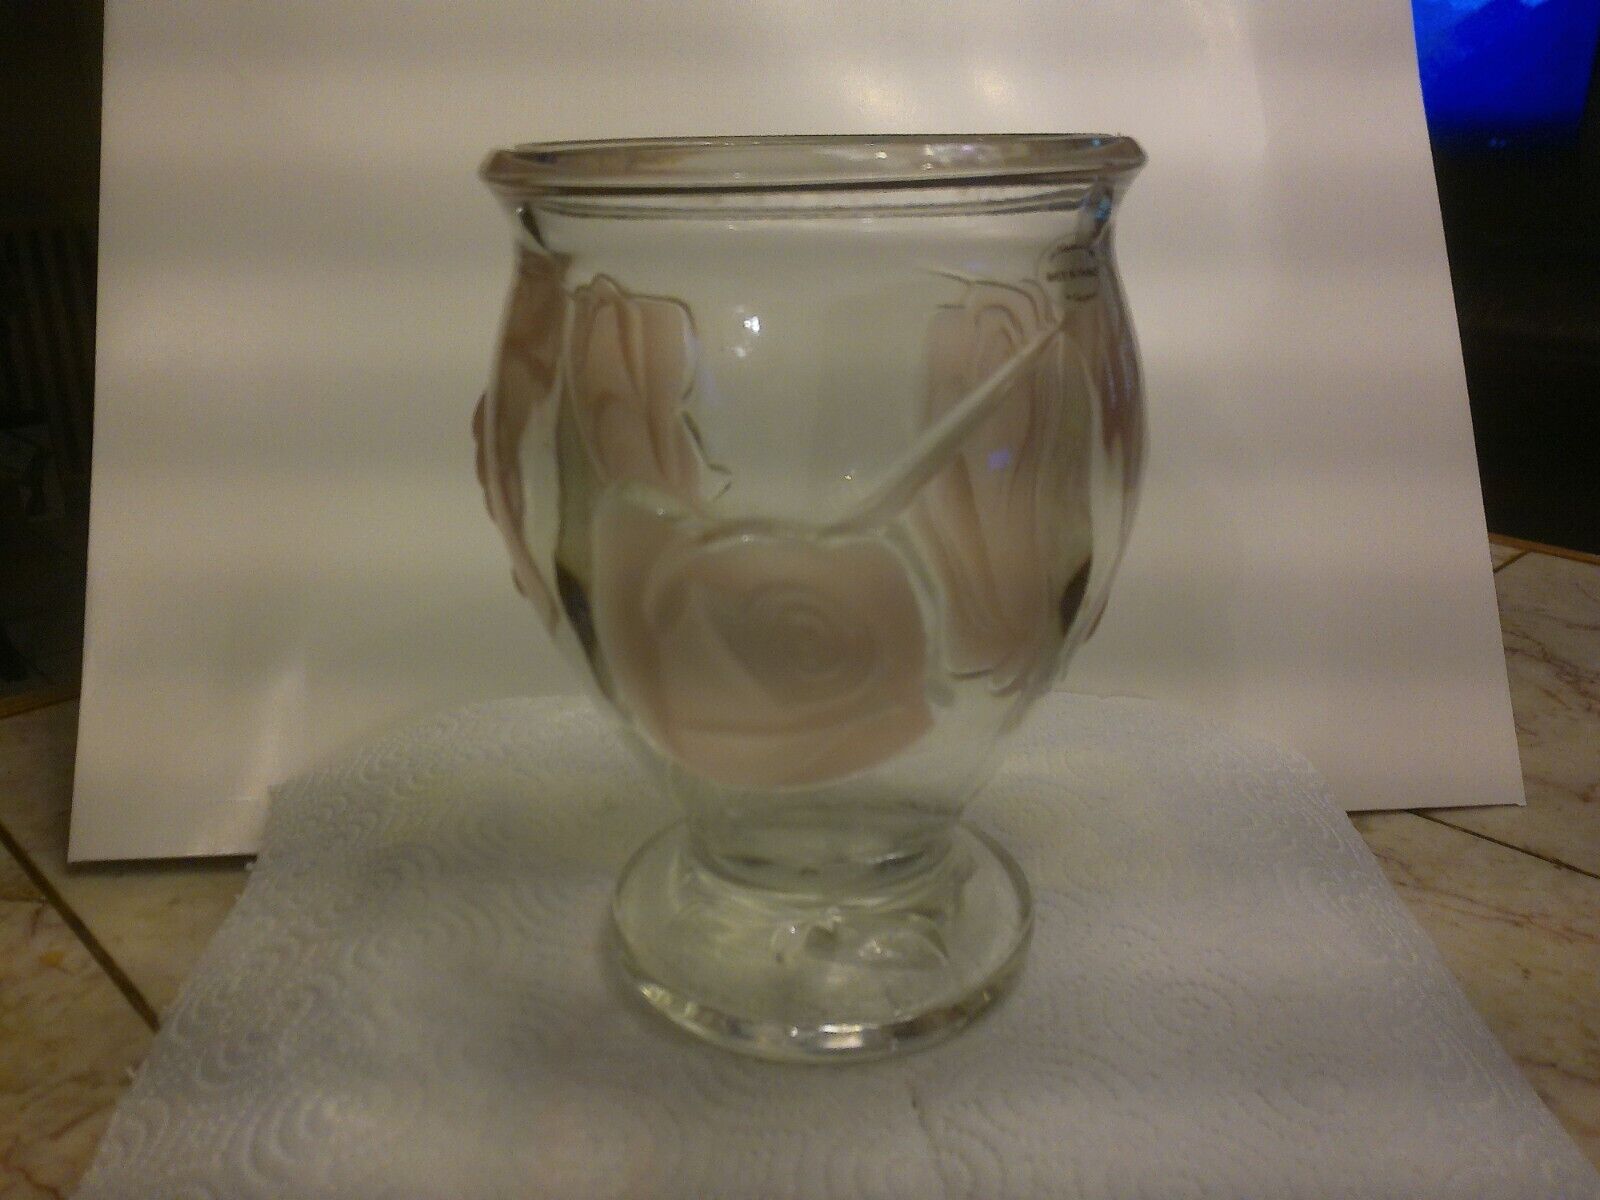 Teleflora French Flower Vase with Embossed Pale Pink Roses